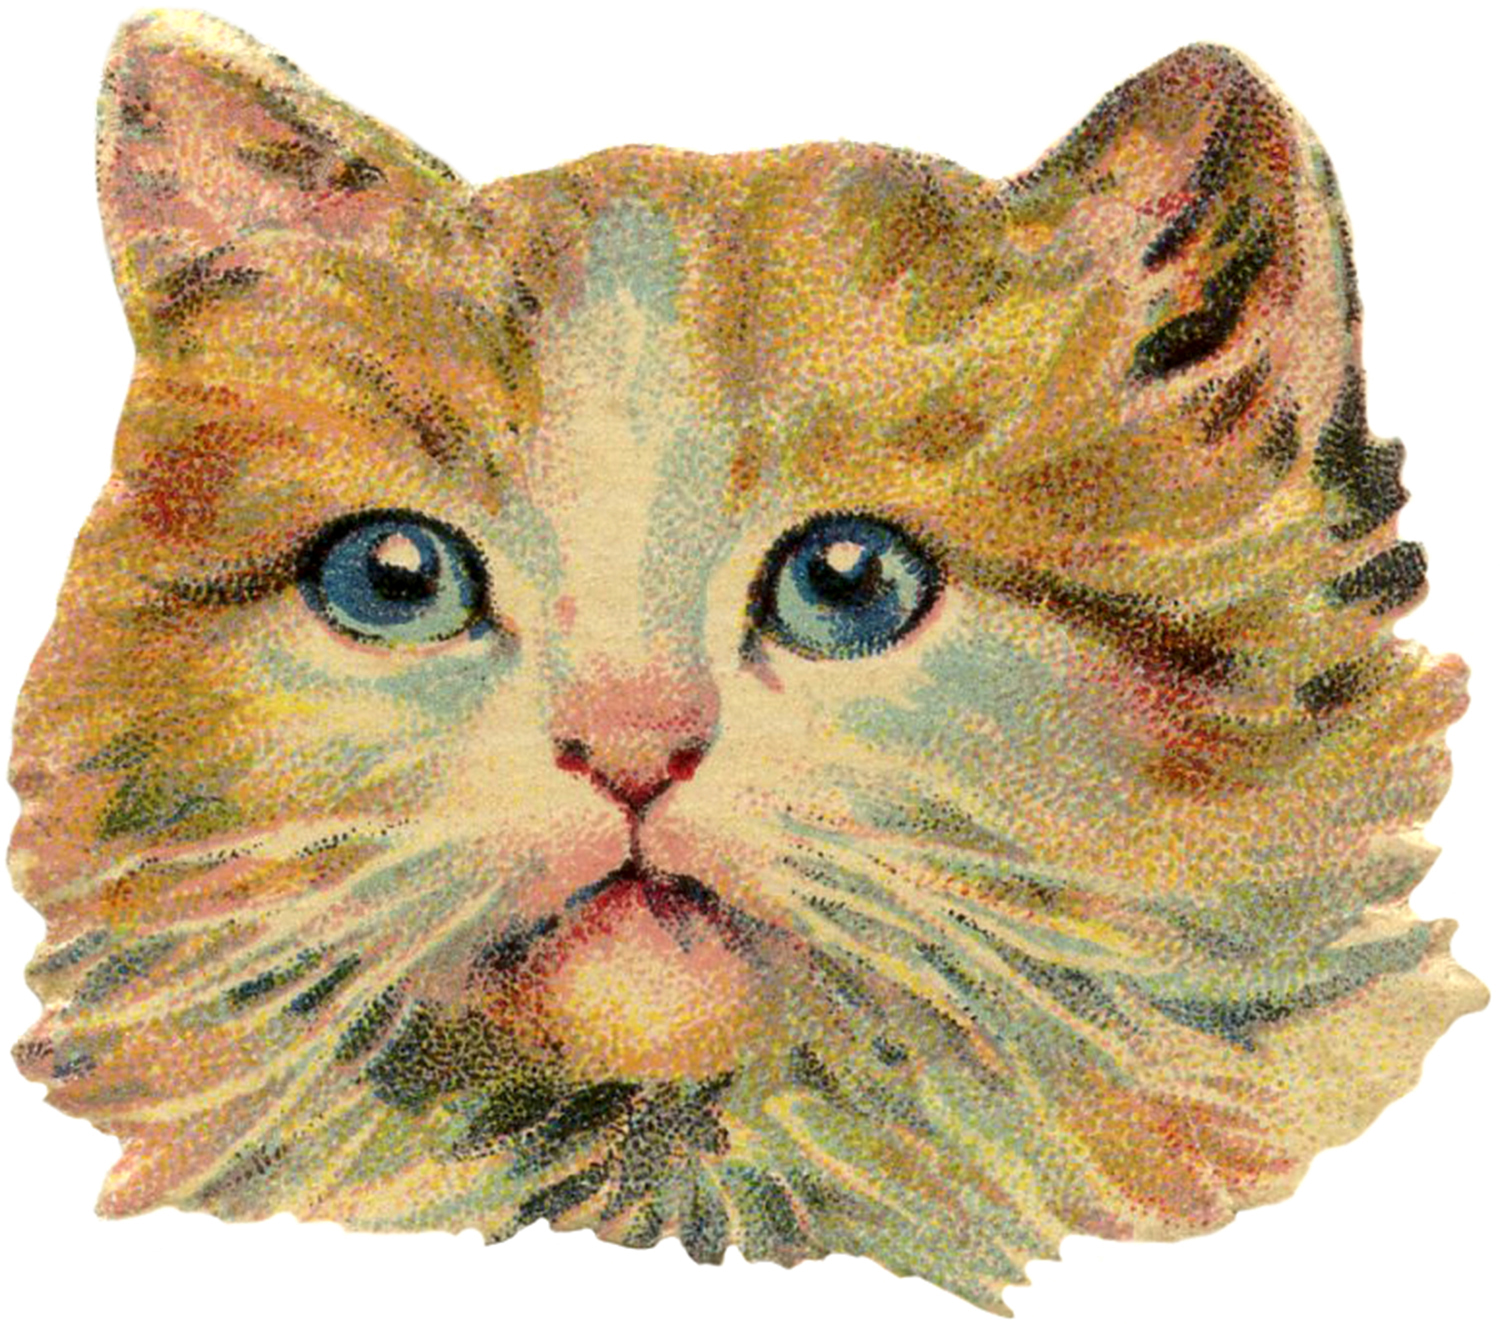 Vintage Cat Image Free - The Graphics Fairy